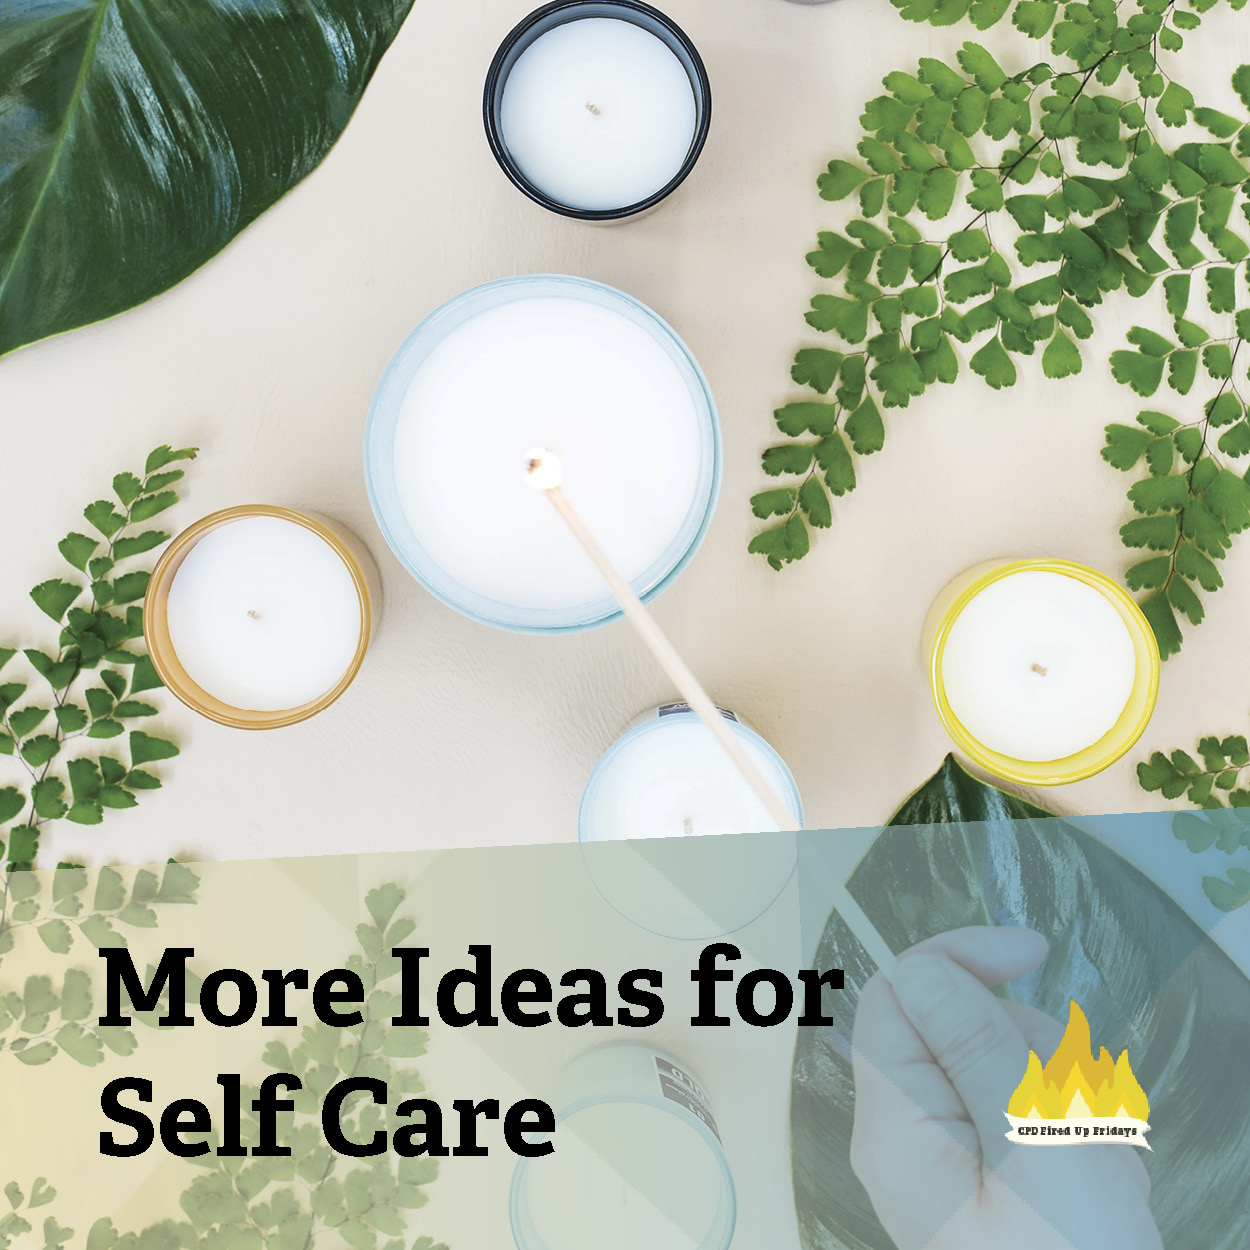 Seen from above, a long wooden match glides over the top of several white candles to light the centermost one. Ferns adorn the table under the candles. Text under the image reads: 'More Ideas for Self Care.'